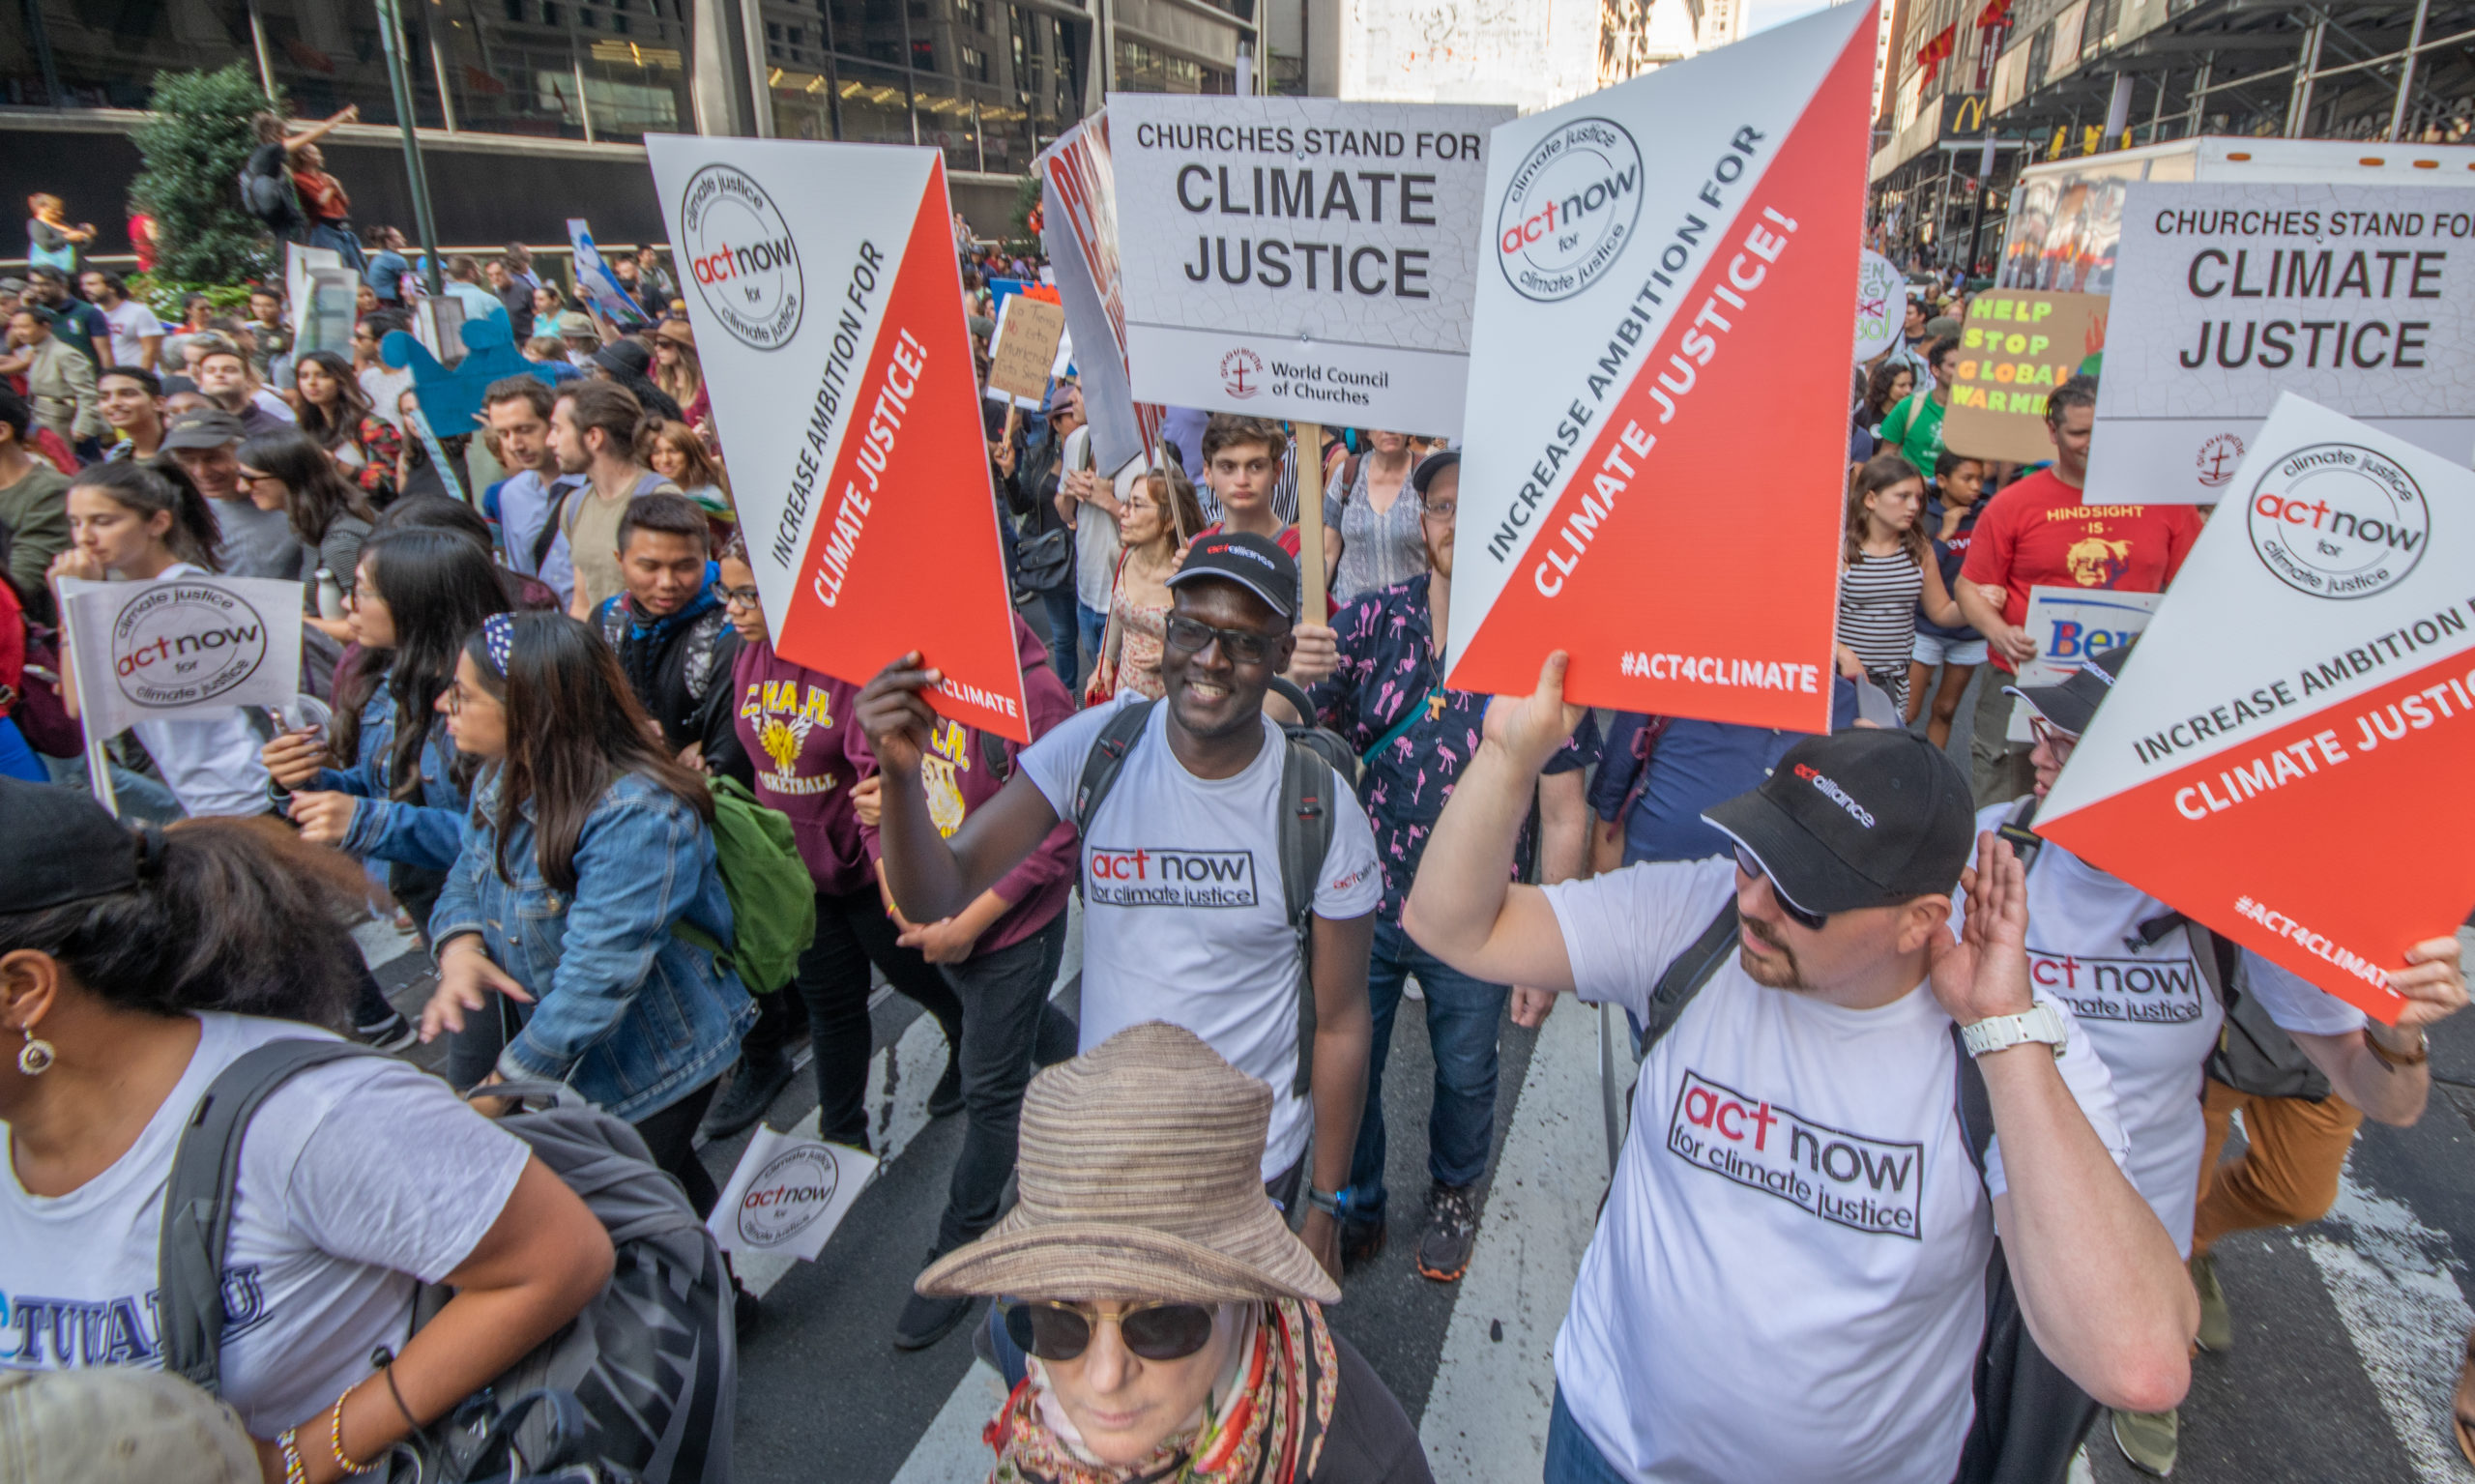 ACT, WCC, LWF and other ecumenical bodies joined tens of thousands in marching through the streets of New York City in the Climate Strike, demanding climate justice now. Photo: Simon Chambers/ACT